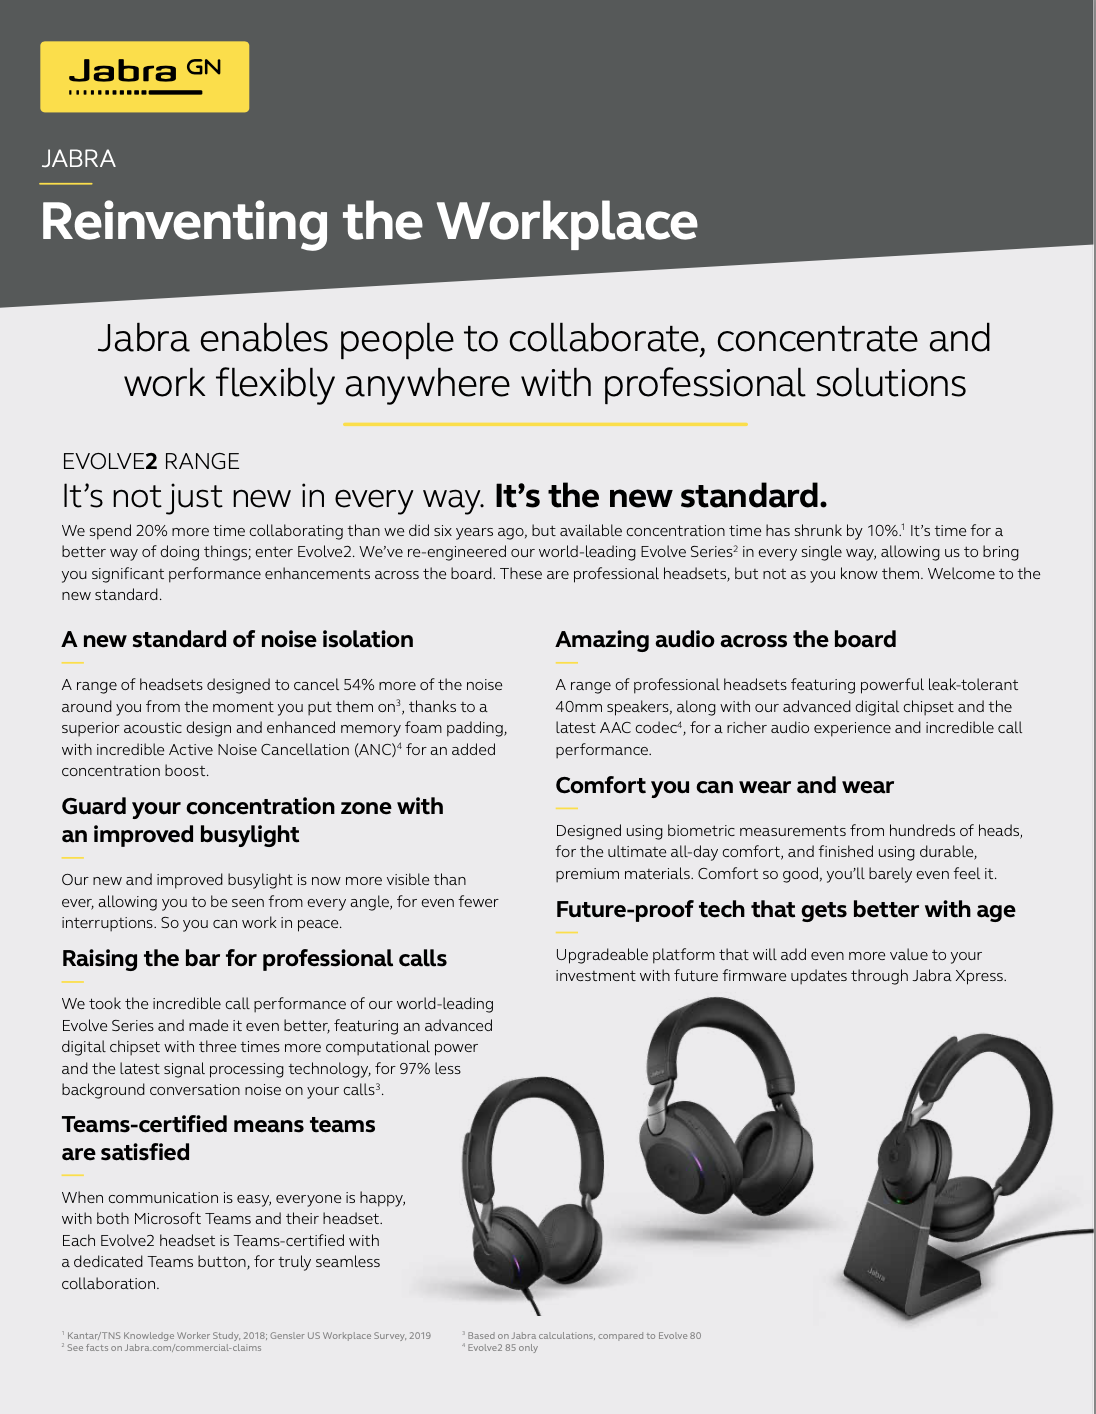 jabra-reinventing-the-workplace-frontpage